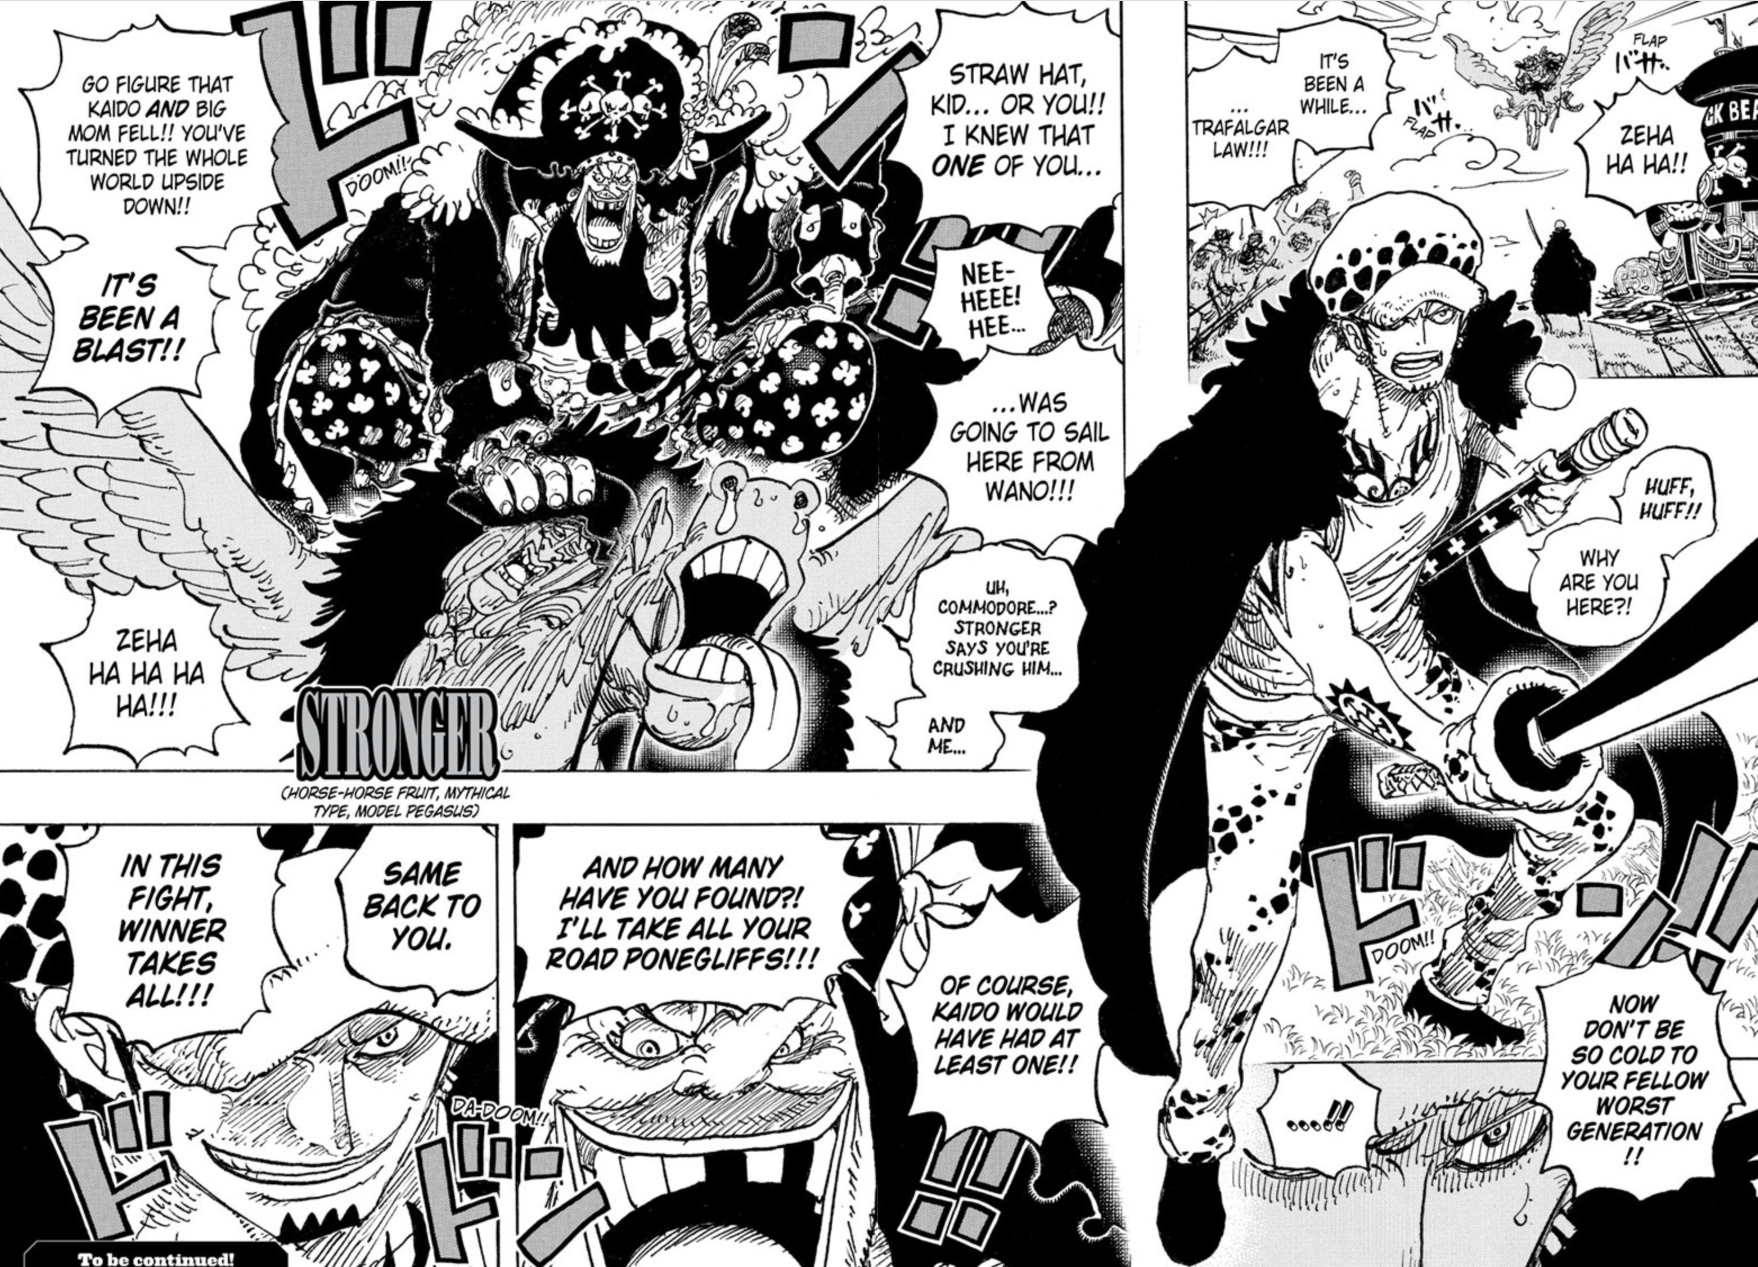 One Piece Chapter 1063 Pages 14-15